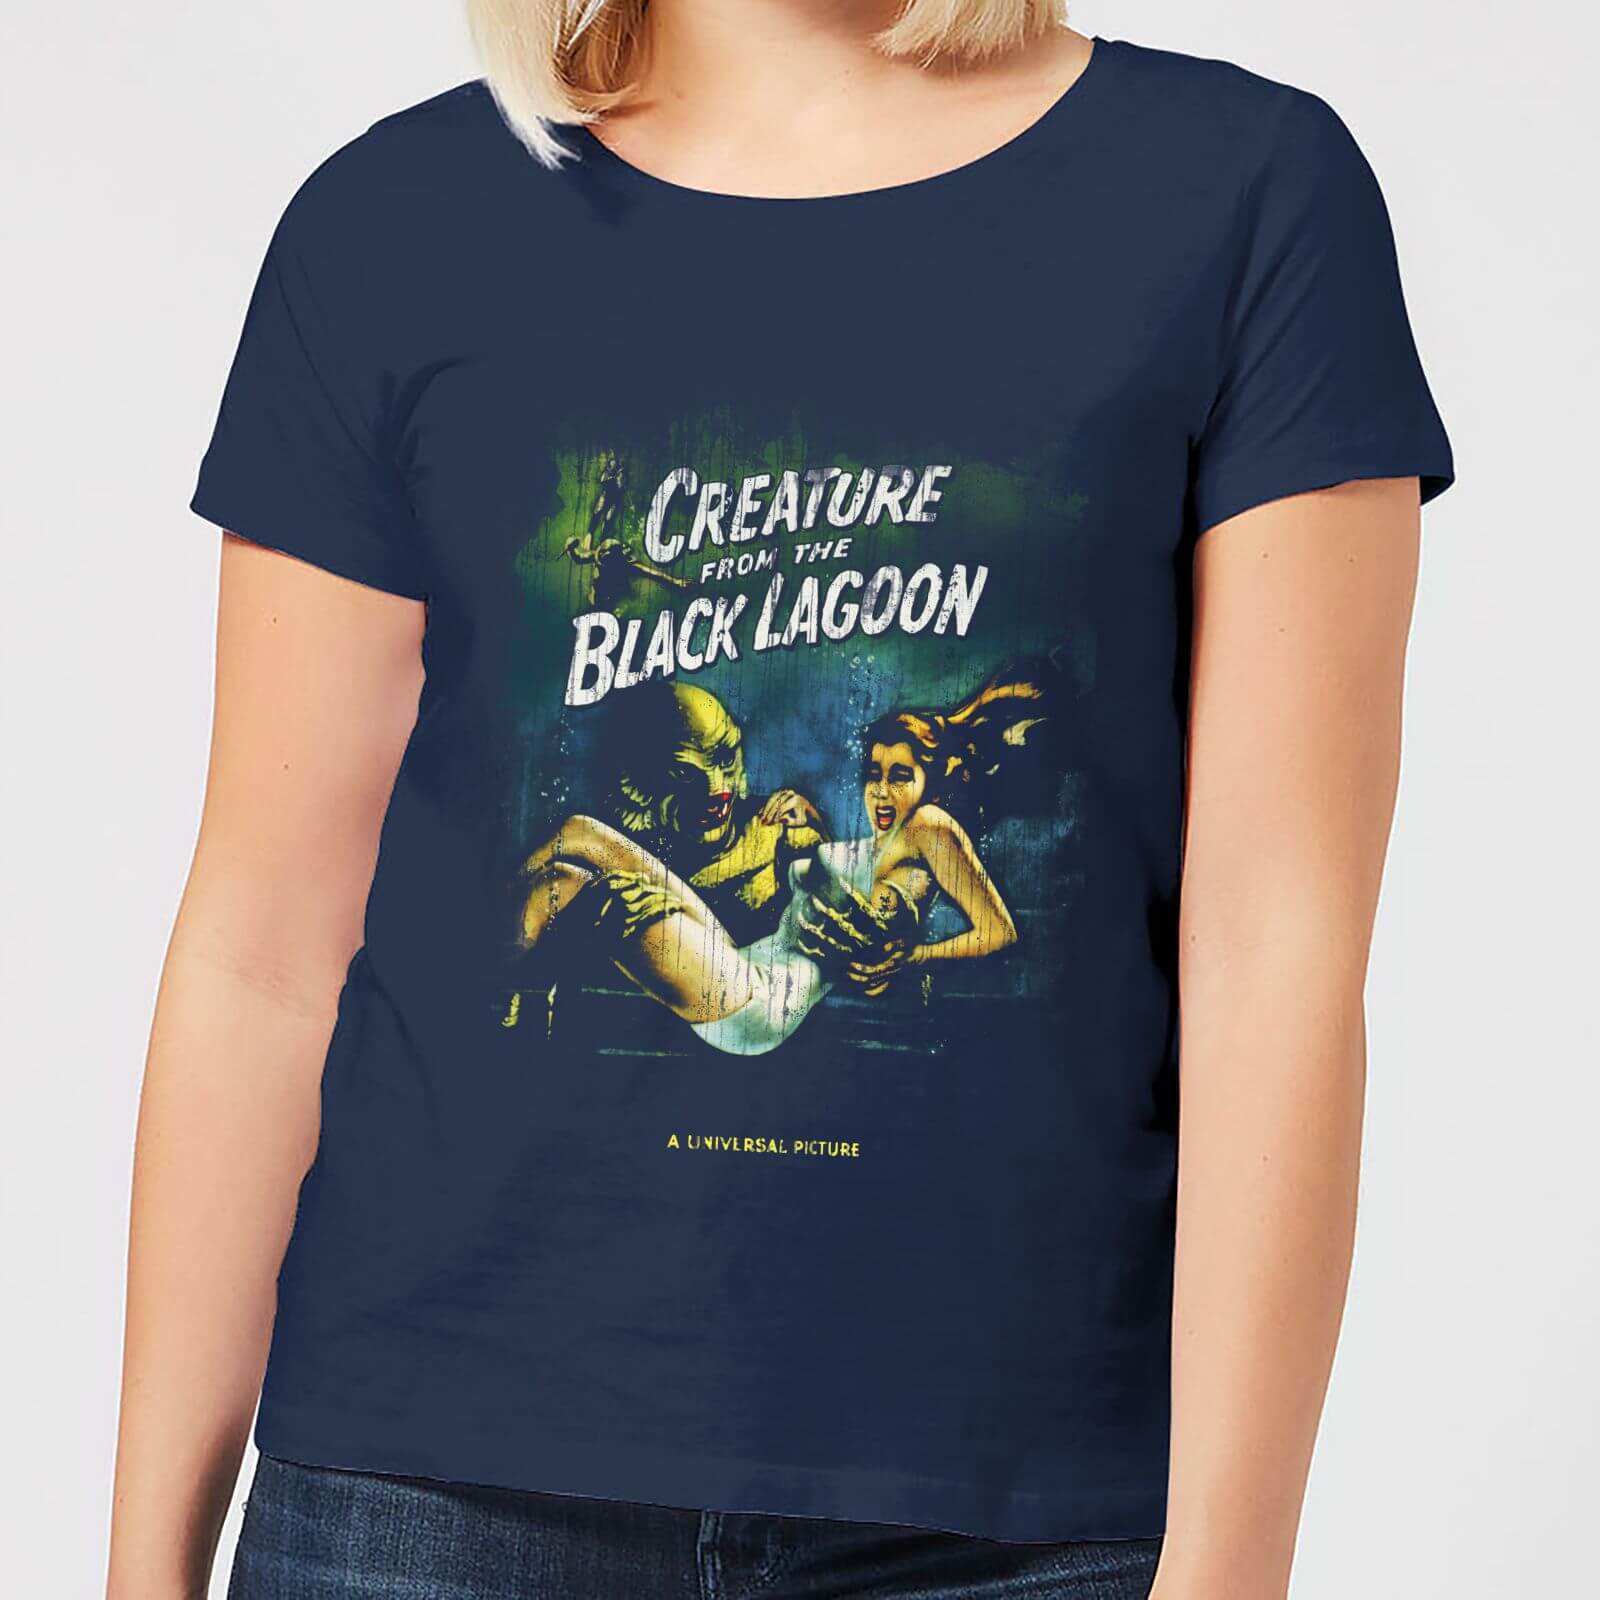 Universal Monsters Creature From The Black Lagoon Vintage Poster Women's T-Shirt - Navy - XXL